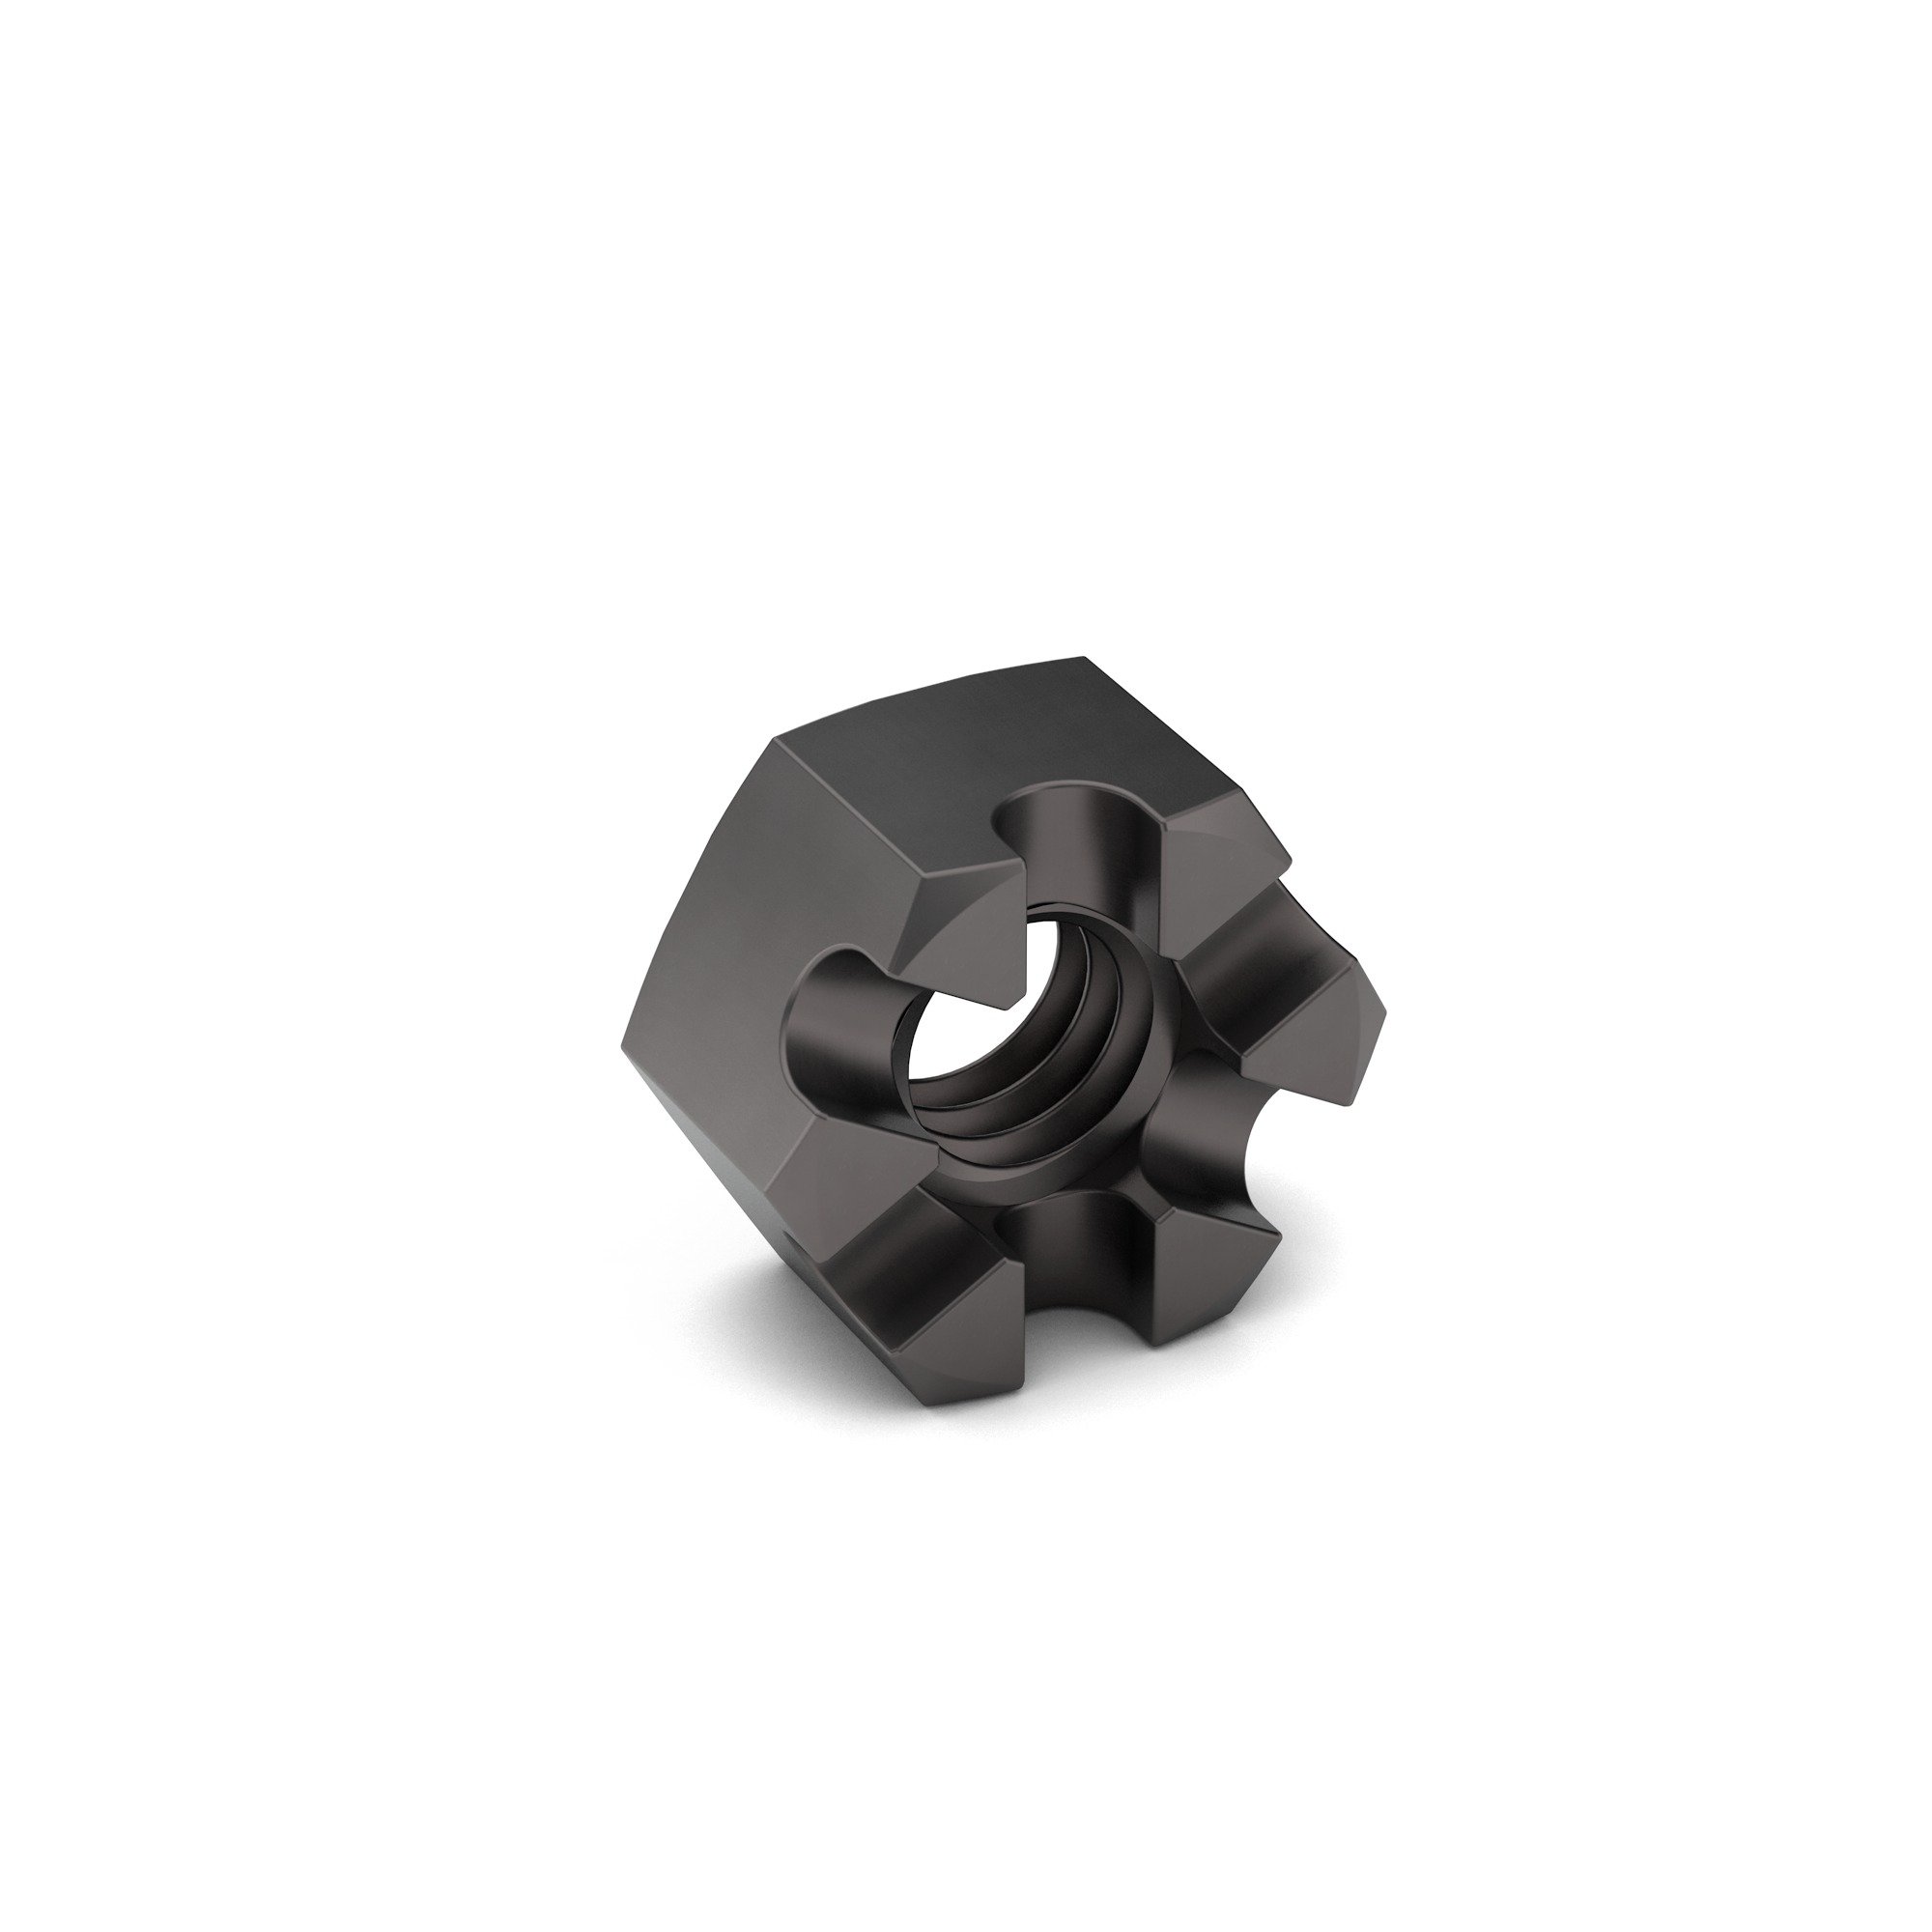 2-12 Carbon Steel Slotted Hex Nut Plain Finish